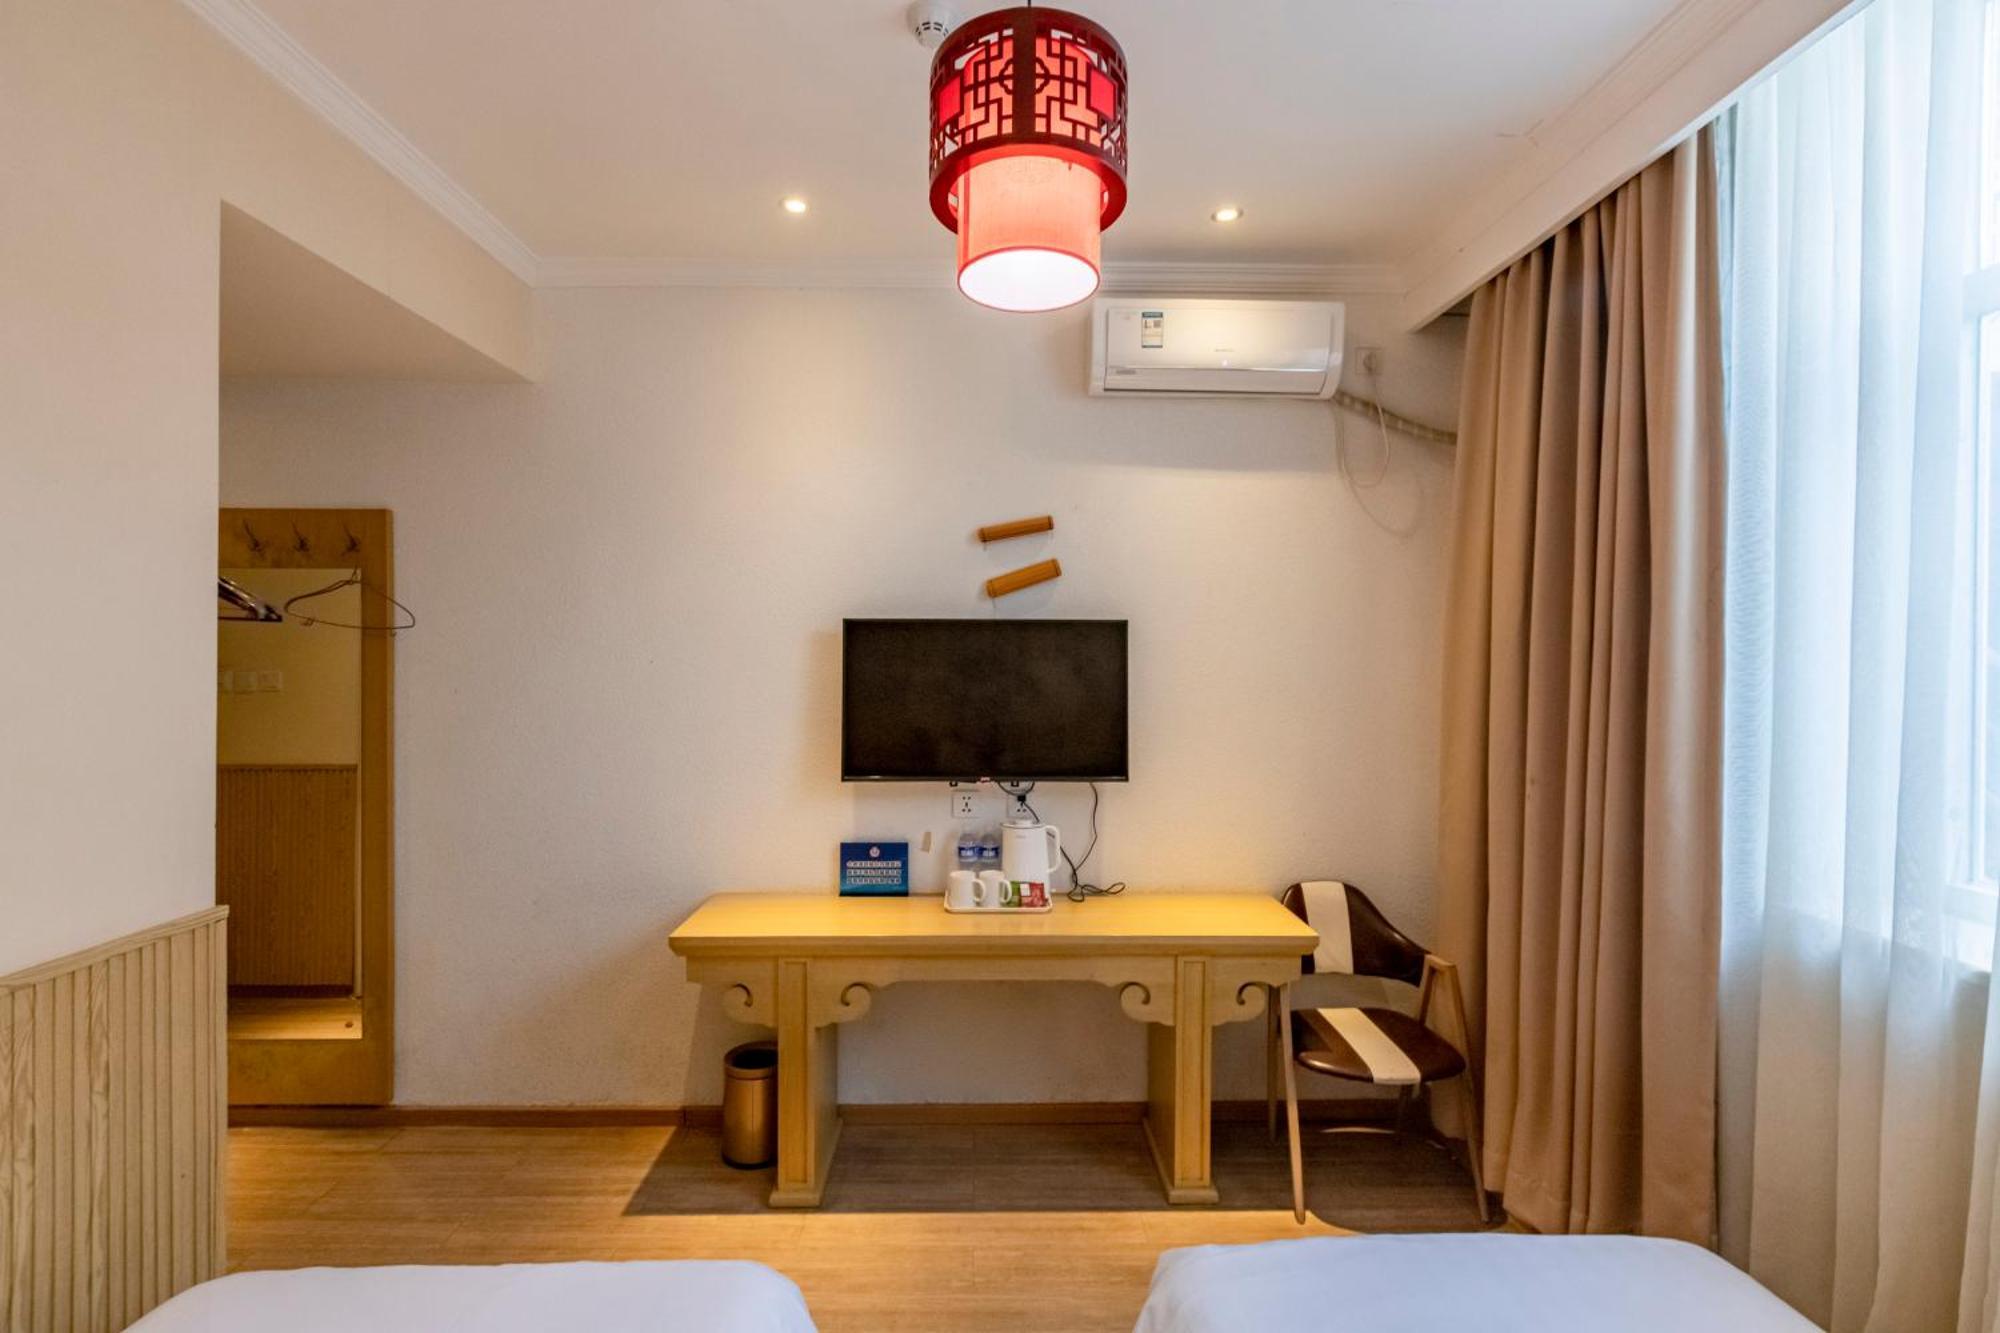 Happy Dragon Alley Hotel-In The City Center With Big Window&Free Coffe, Fluent English Speaking,Tourist Attractions Ticket Service&Food Recommendation,Near Tian Anmen Forbiddencity,Near Lama Temple,Easy To Walk To Nanluoalley&Shichahai Beijing Exterior photo